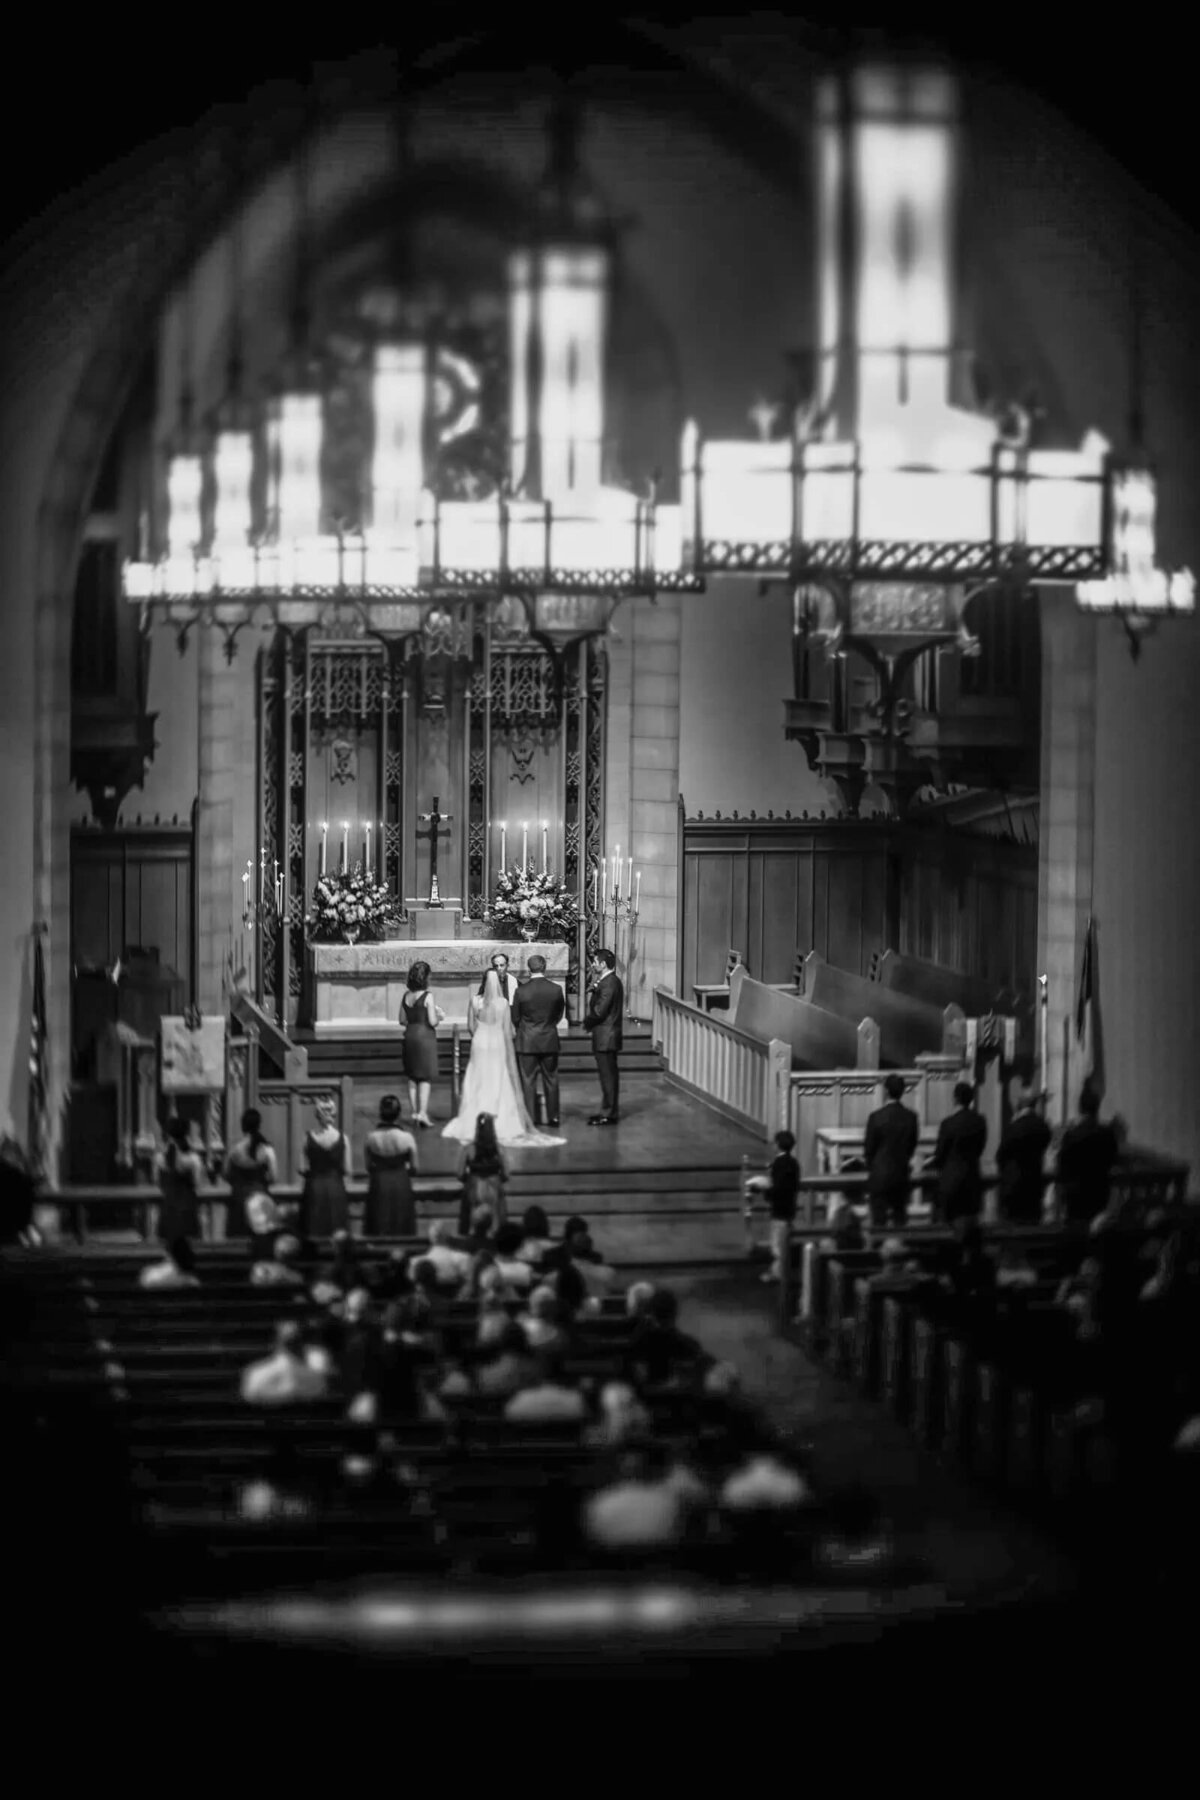 A striking black and white photo shows a bride and groom at the end of the church aisle